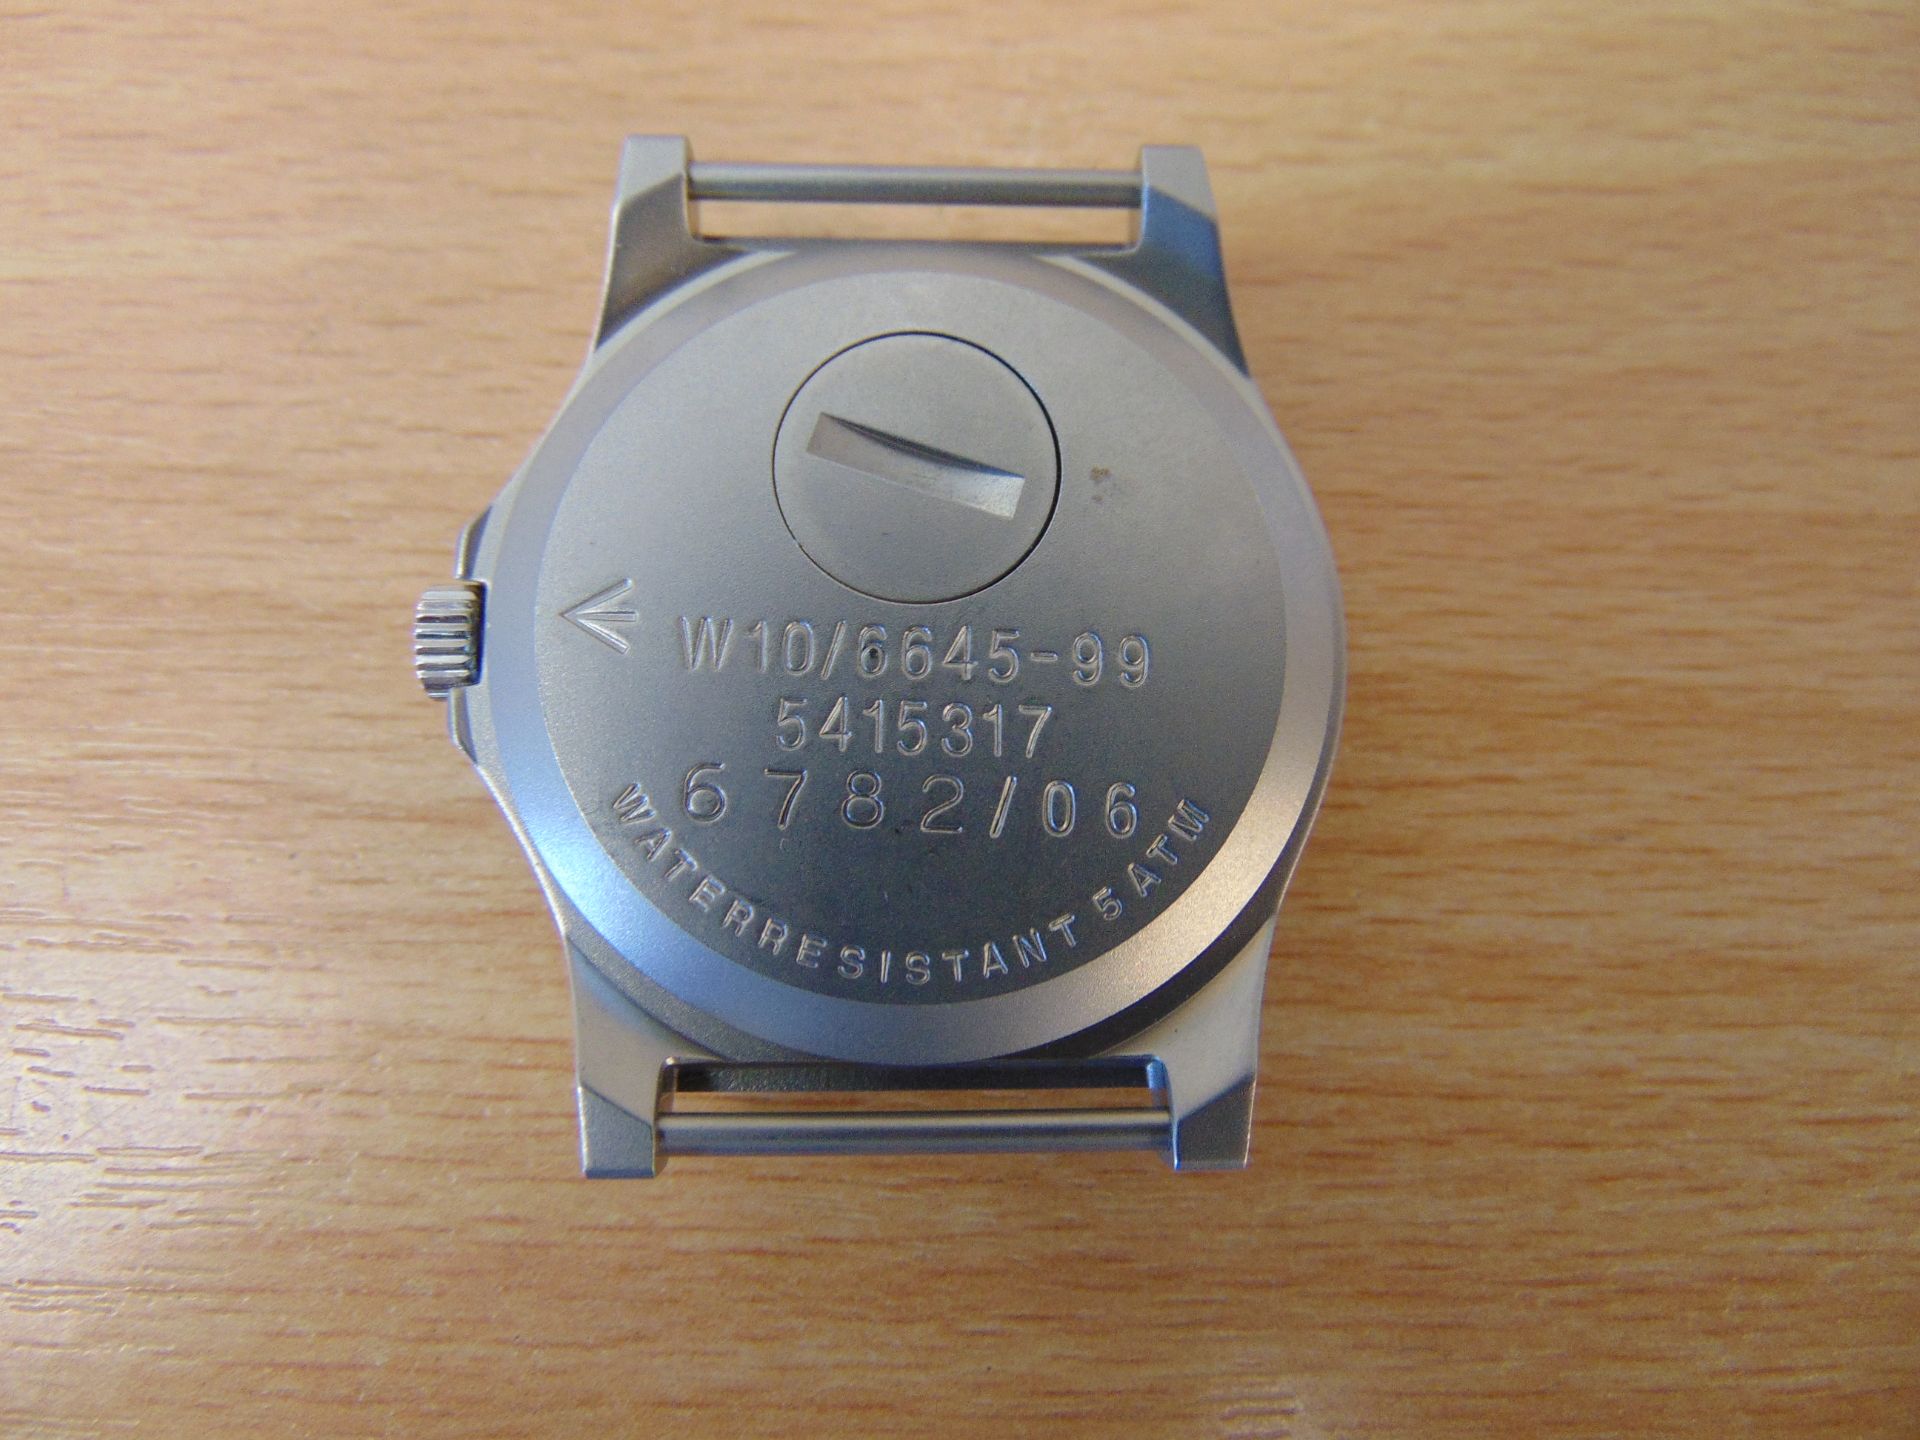 New and Unissued CWC W10 British Army Service Watch Water Resistant to 5ATM - Nato Marks Date 2006 - Image 2 of 3